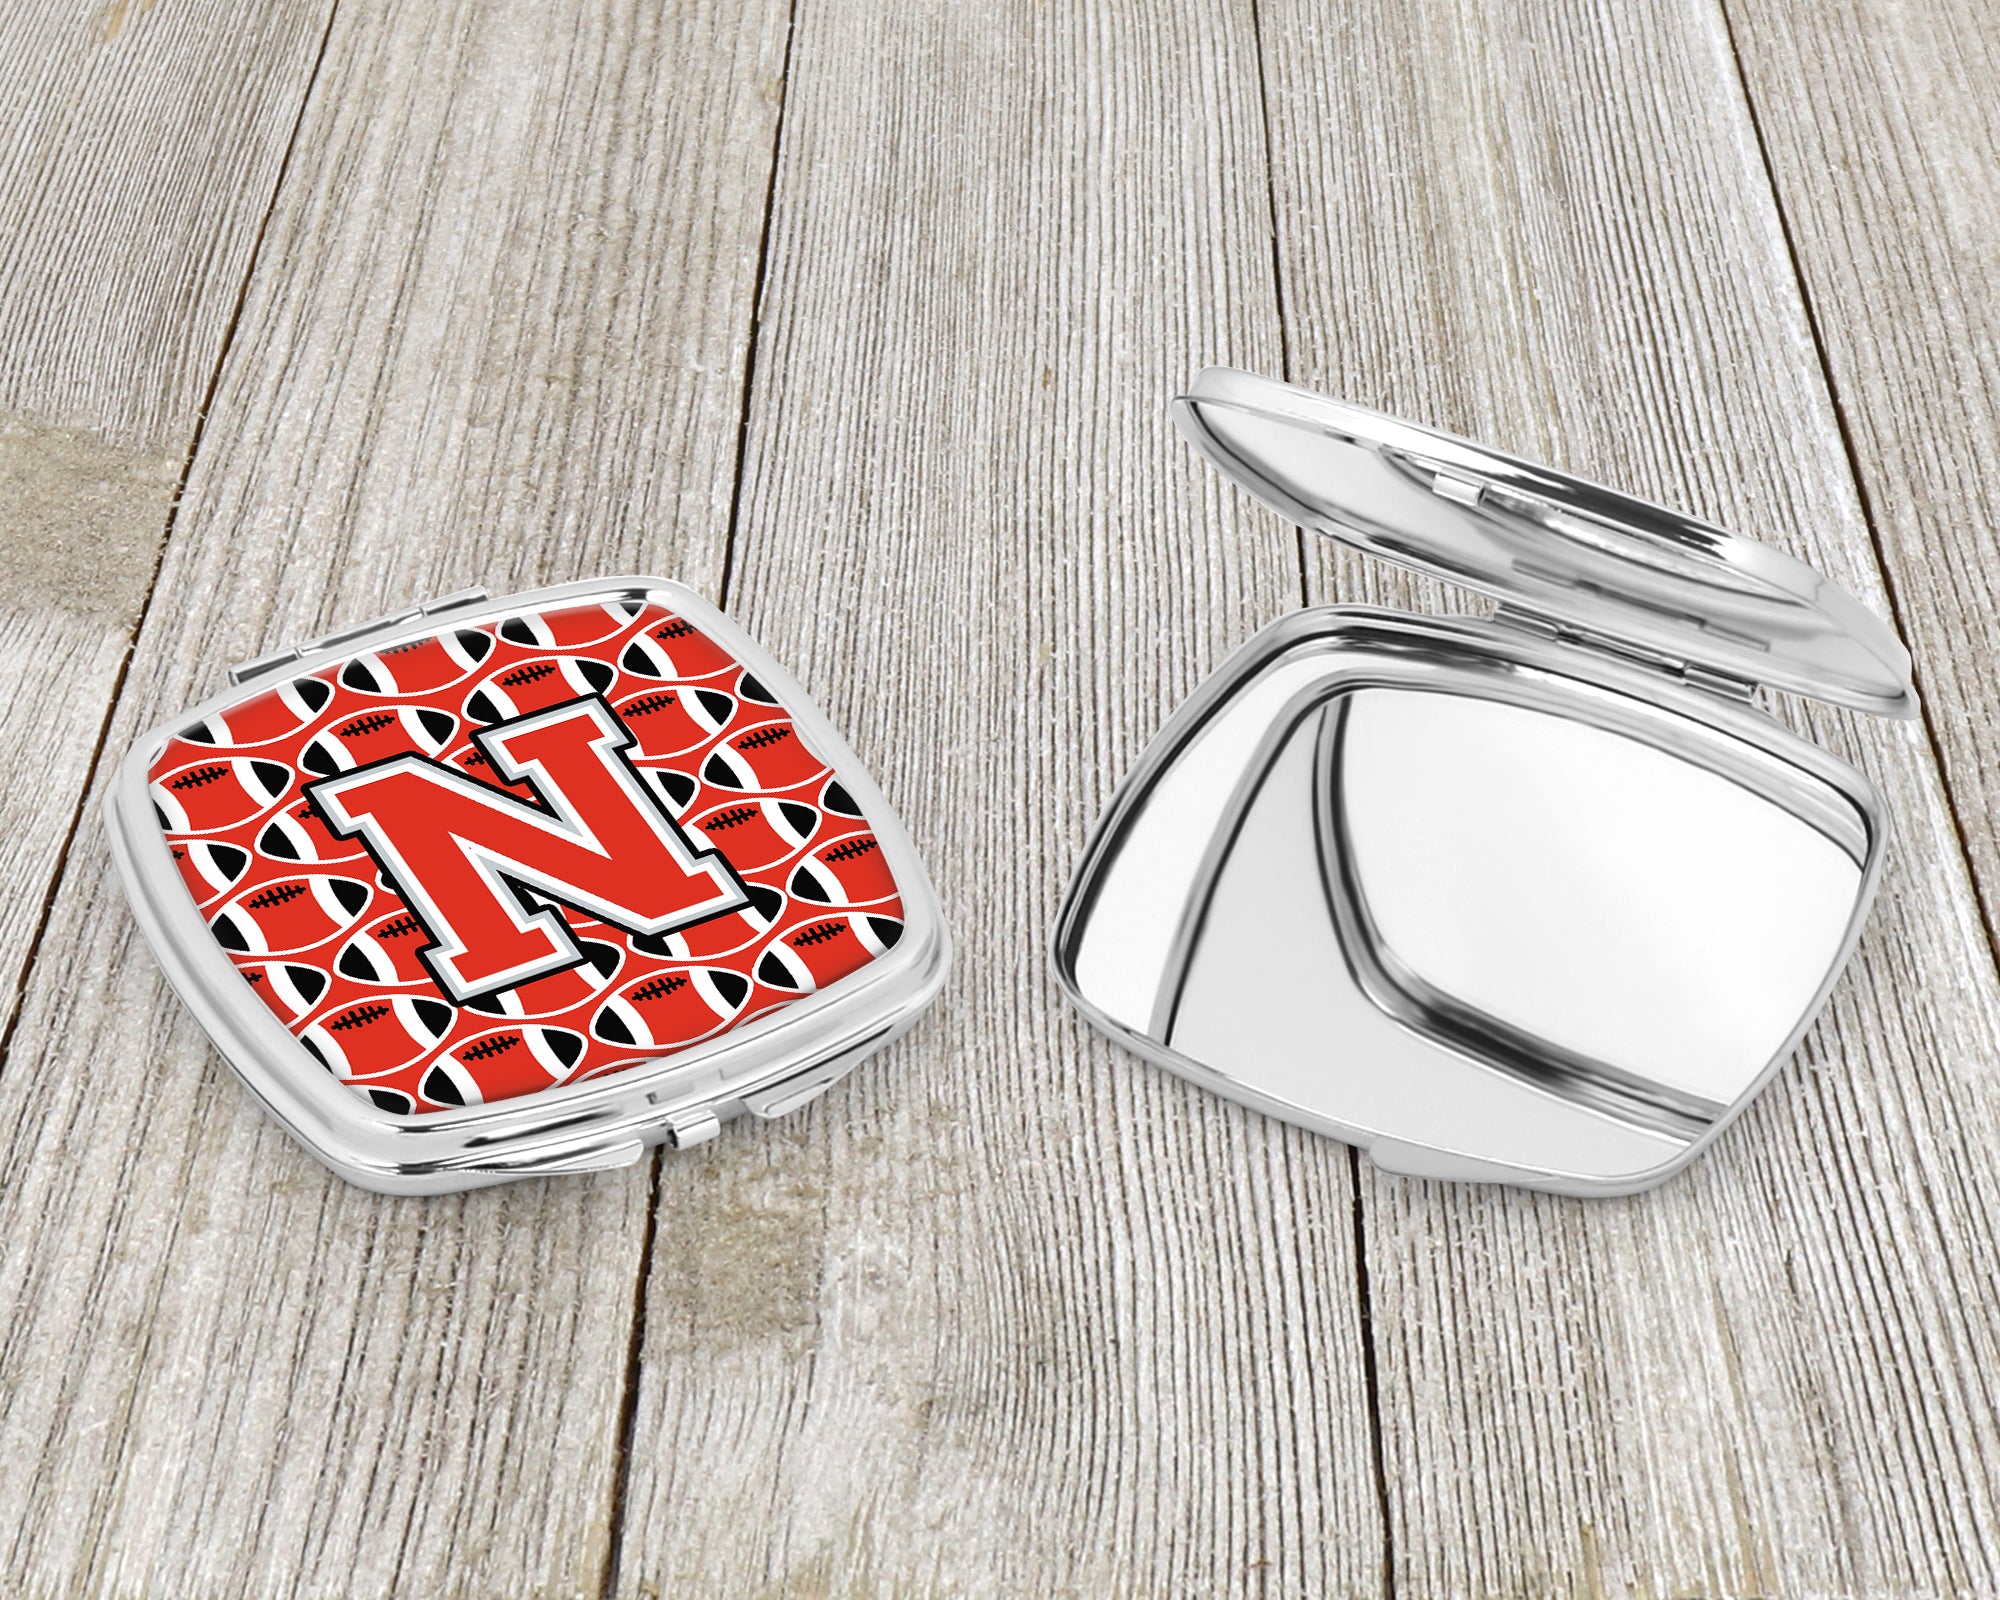 Letter N Football Scarlet and Grey Compact Mirror CJ1067-NSCM